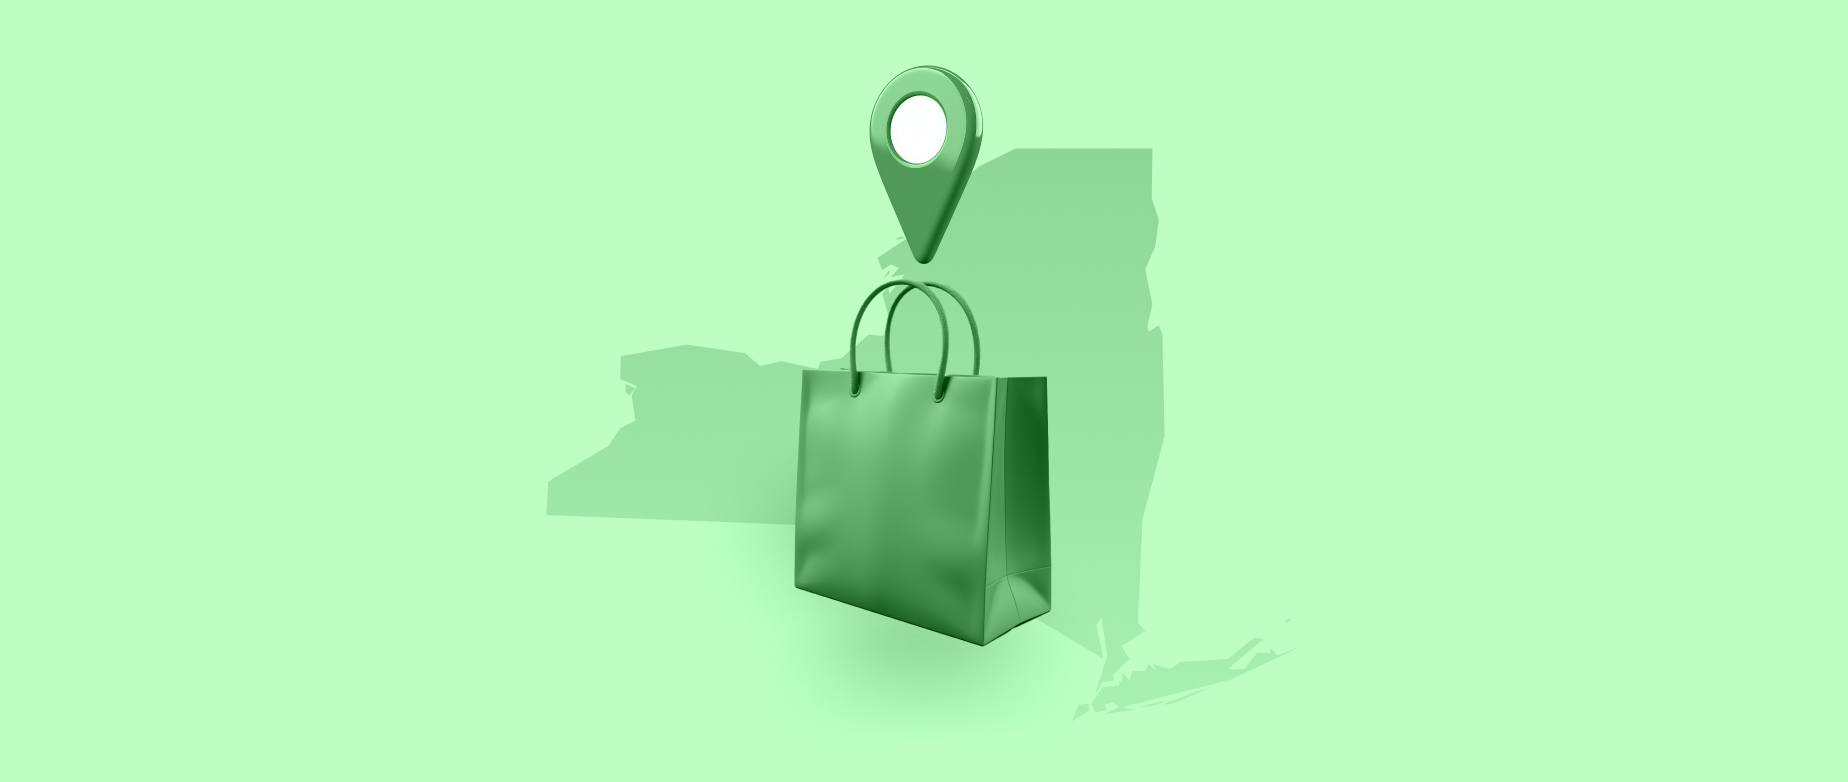 An outline of New York behind a green shopping bag and location icon on a green background.